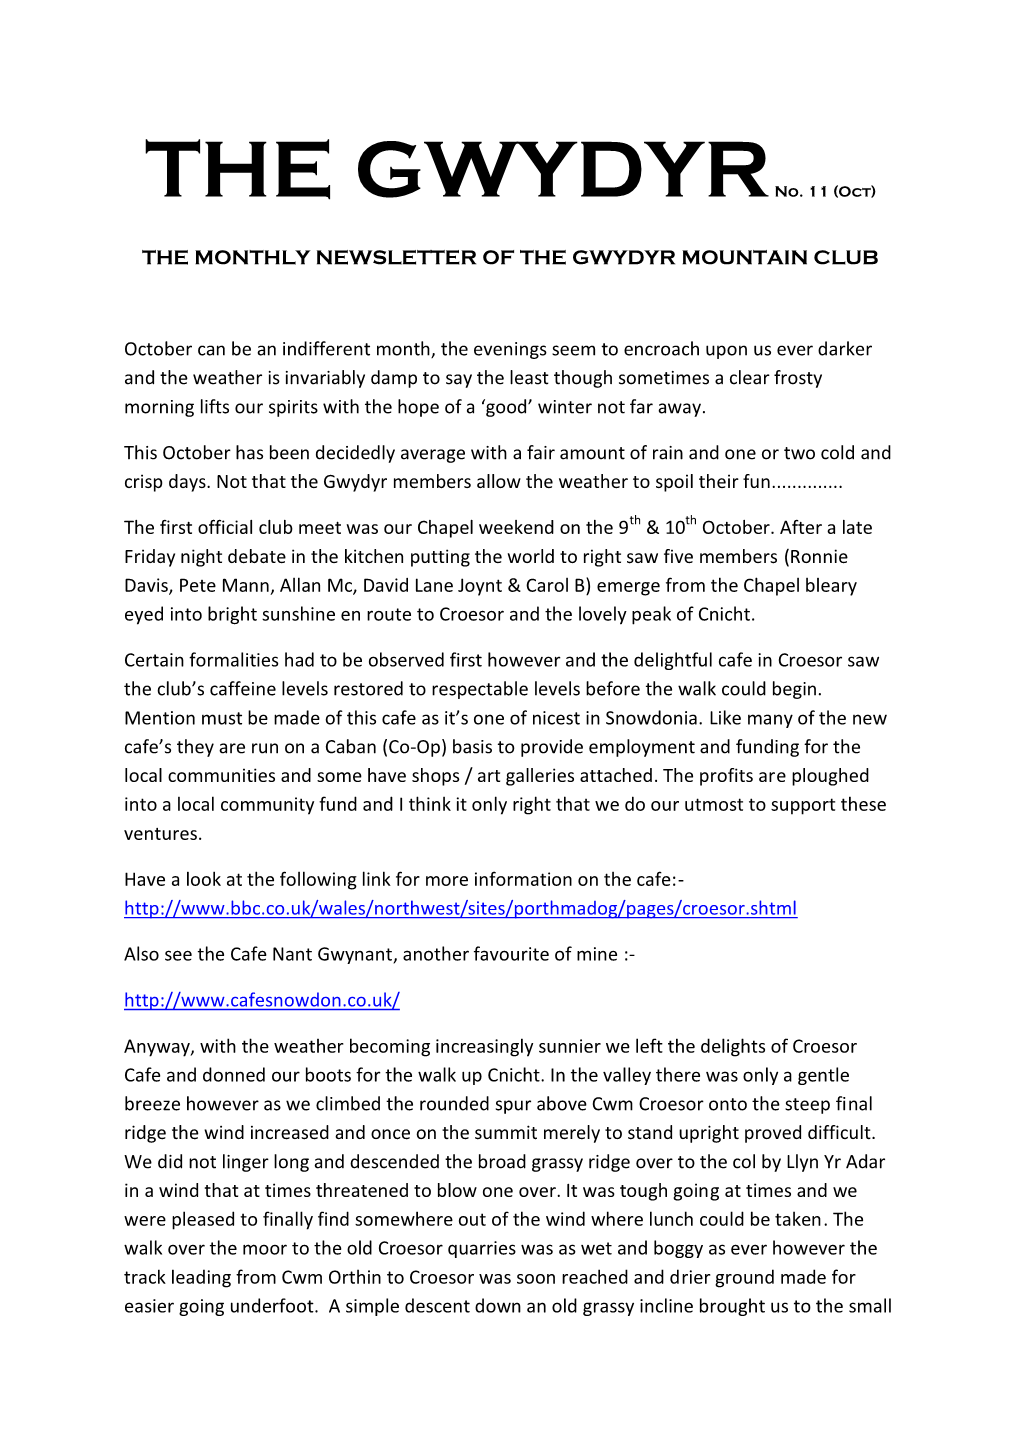 The Monthly Newsletter of the Gwydyr Mountain Club